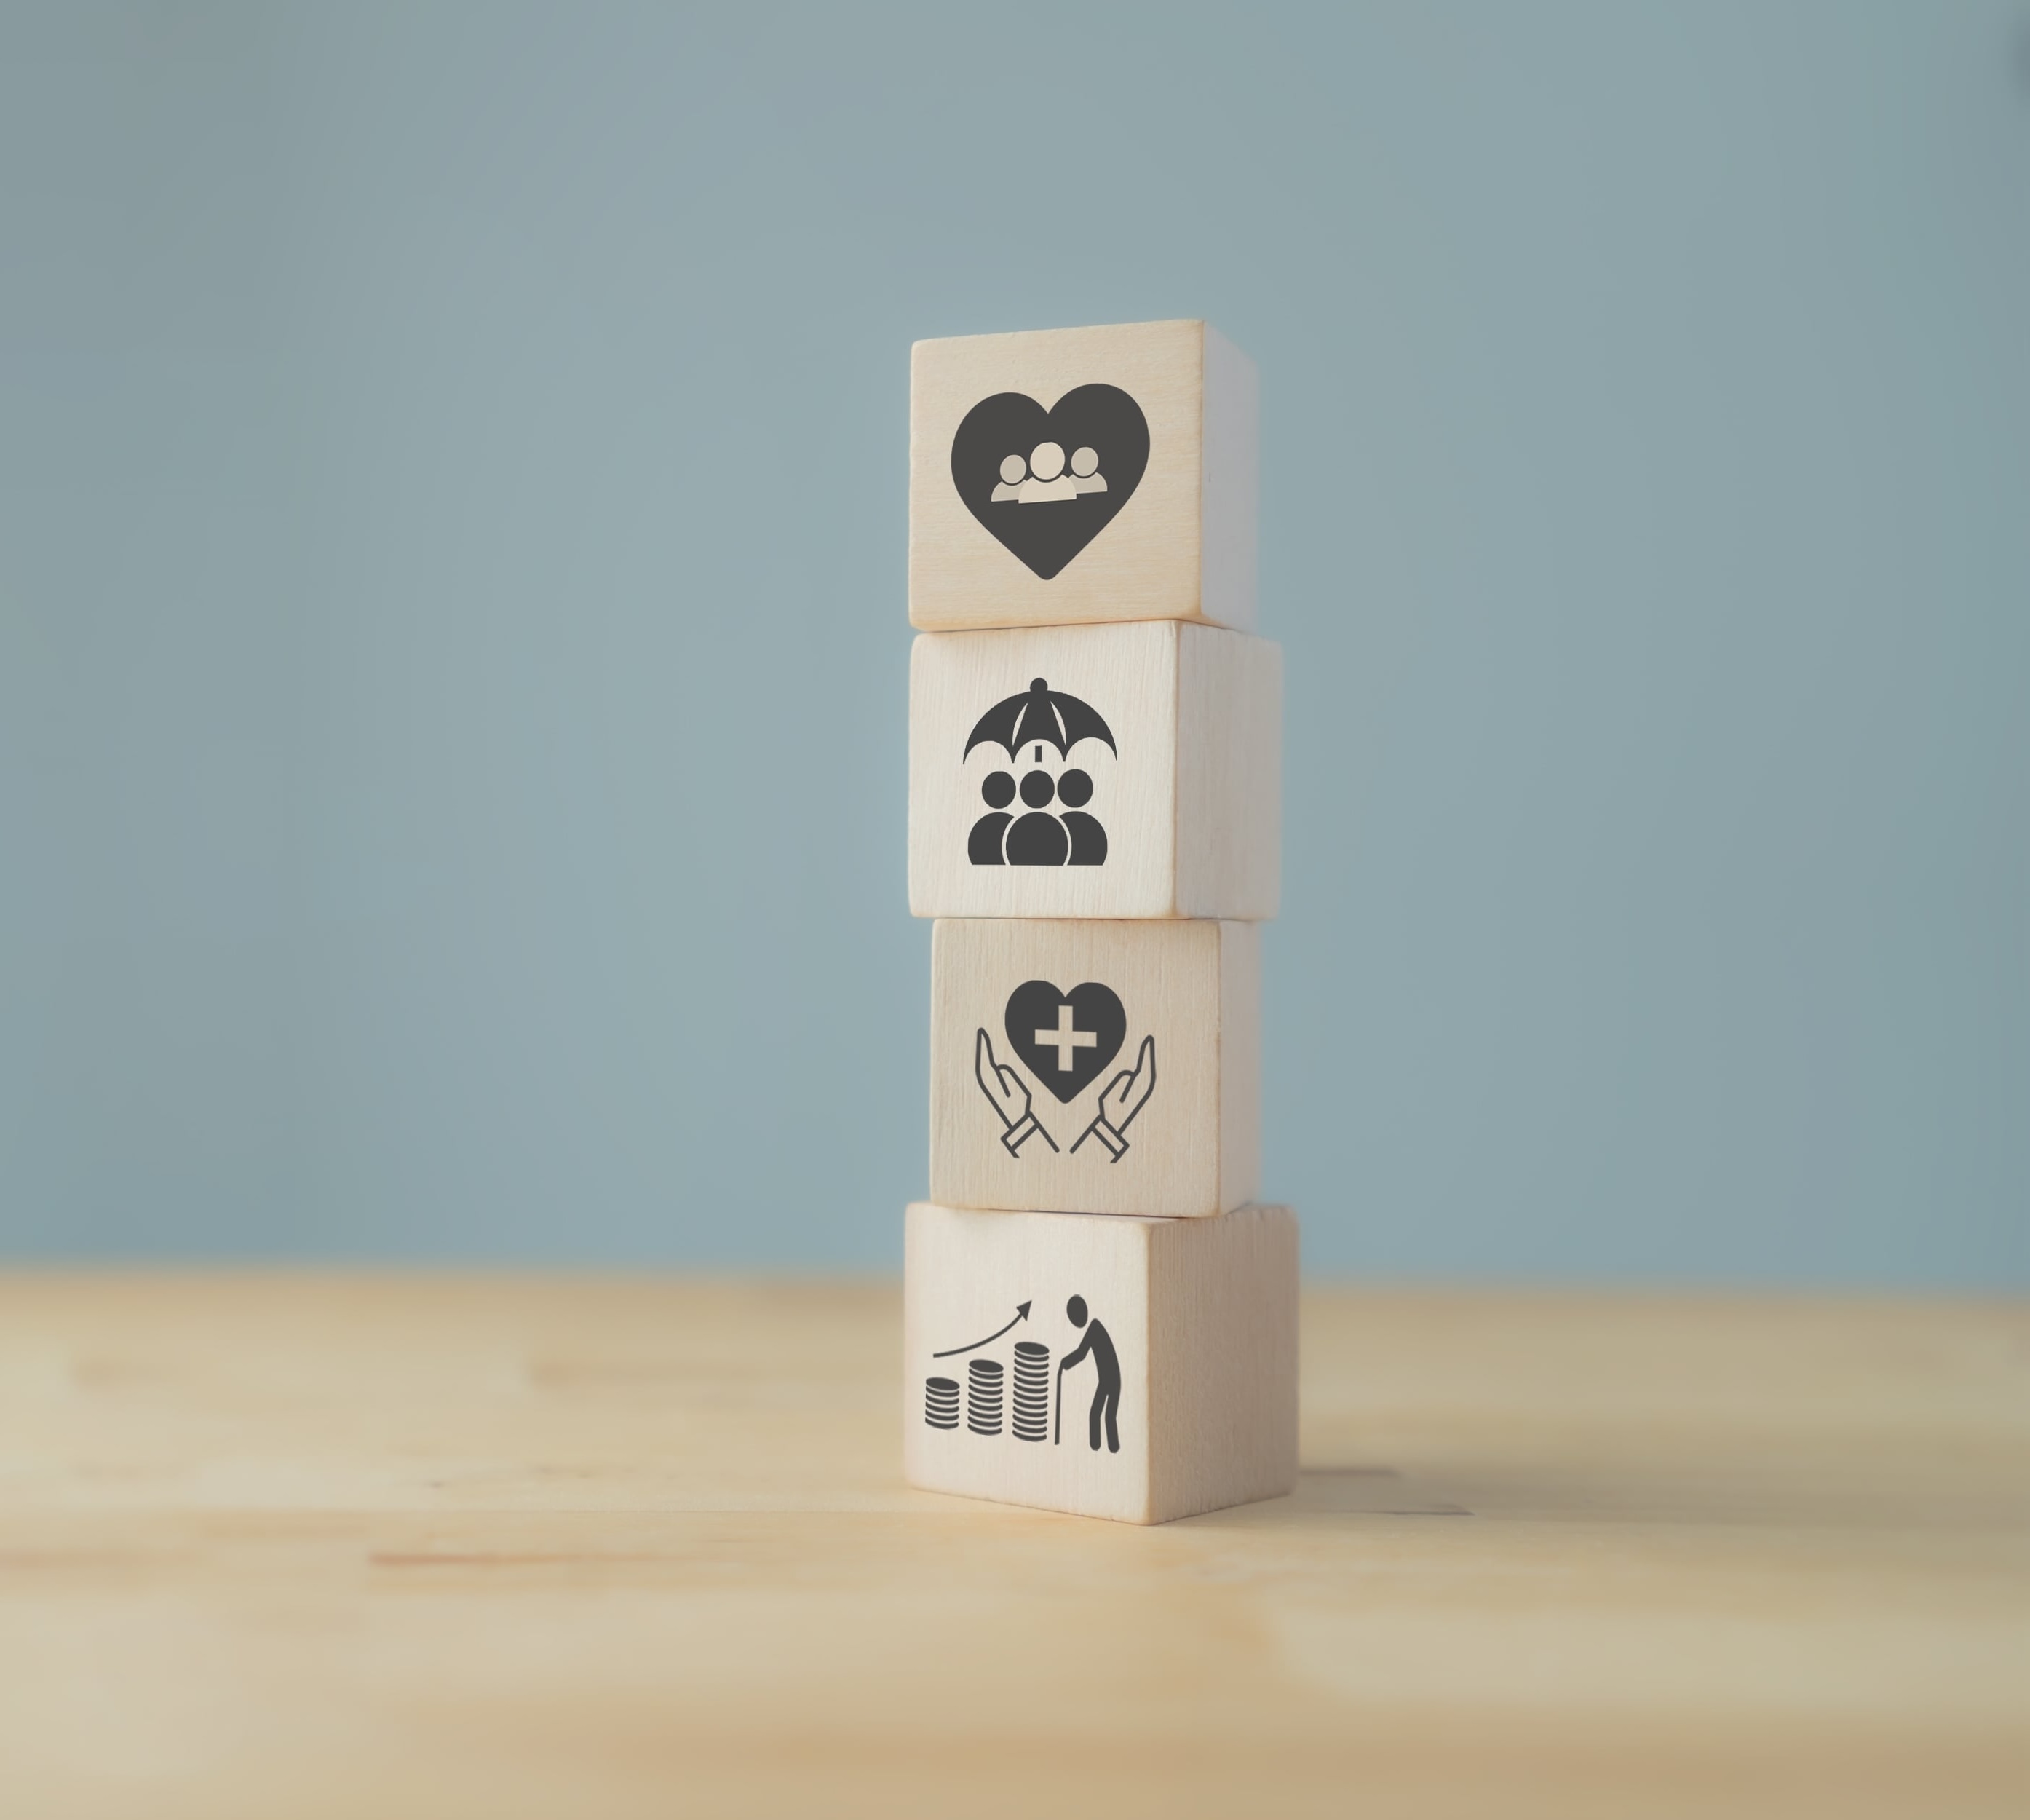 four wooden blocks stacked on top of each other each has a symbol relating to employee benefits on it.